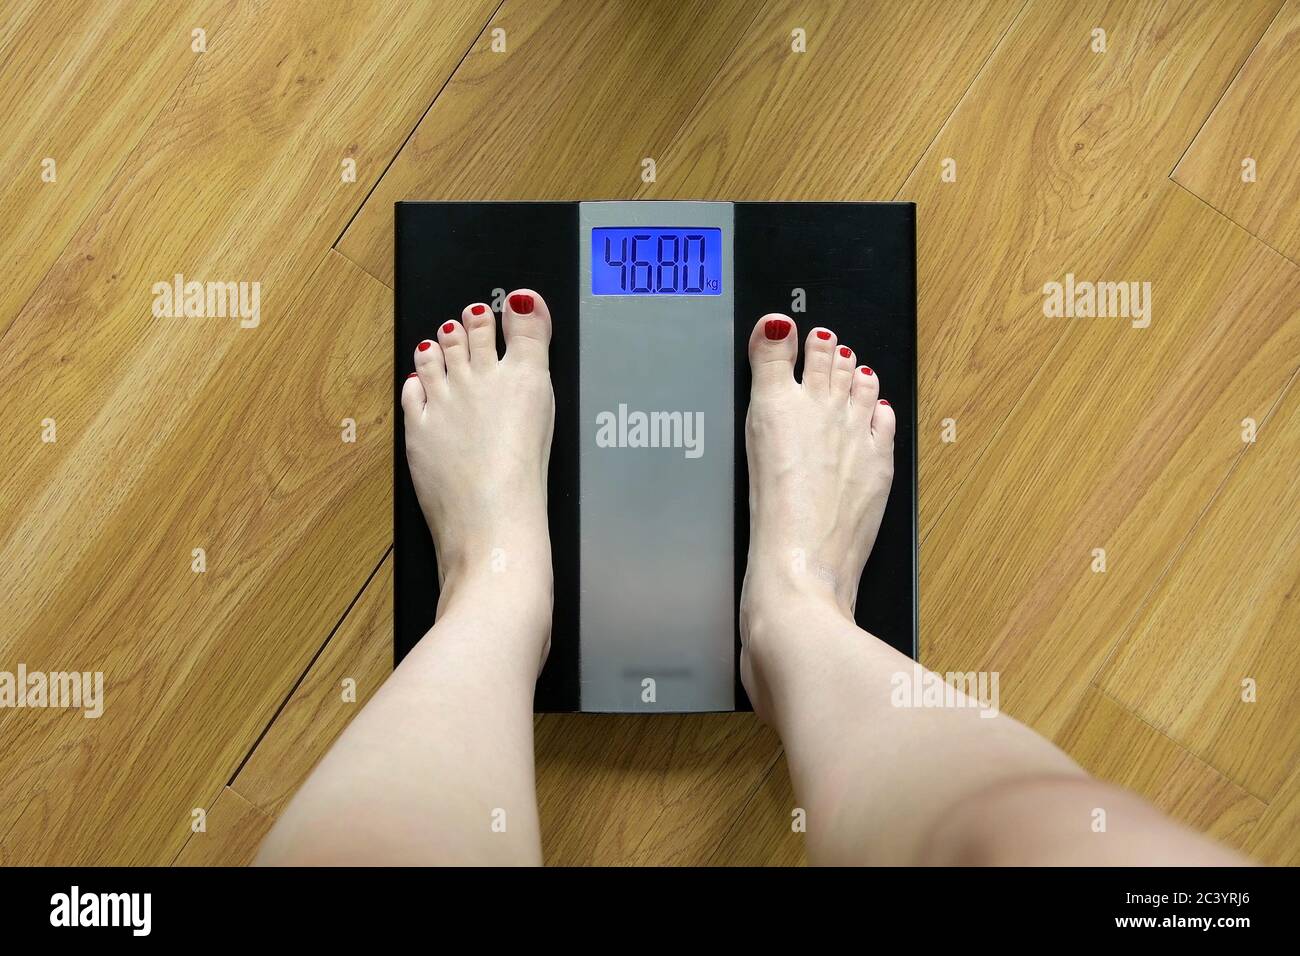 Overweight Fat Woman On The Weight Scale Stock Photo, Picture and Royalty  Free Image. Image 11259411.